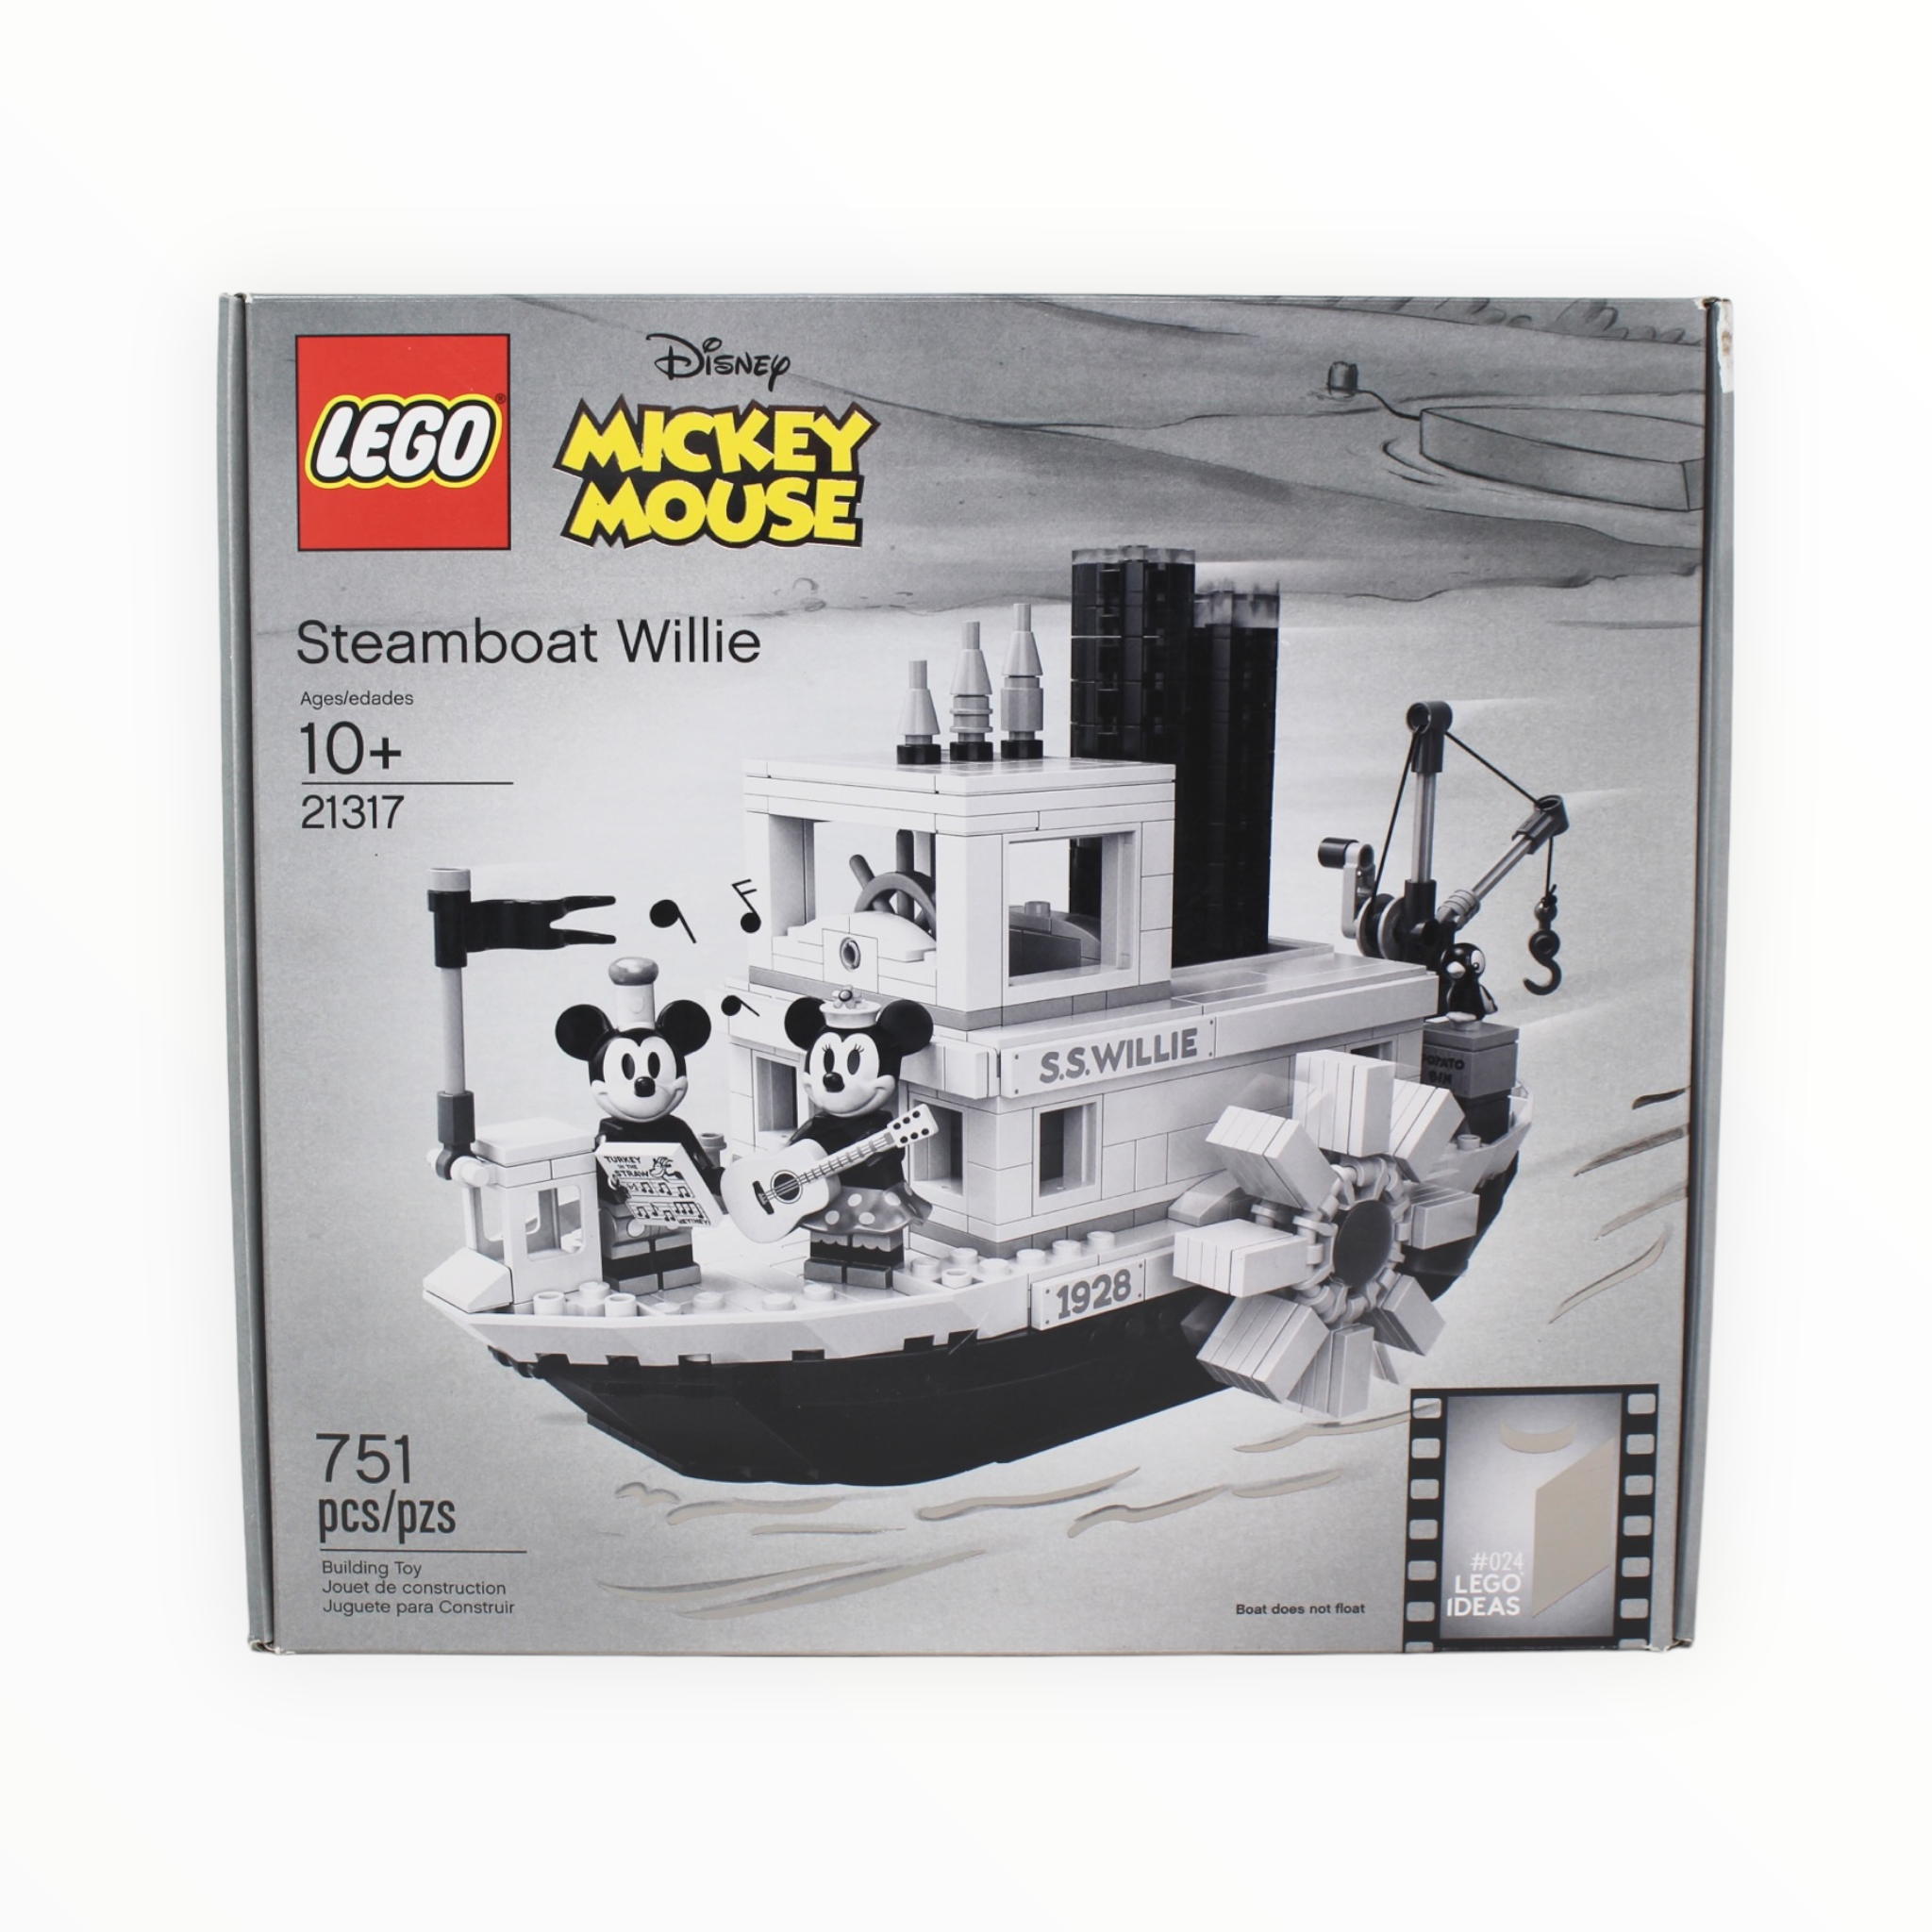 Certified Used Set 21317 LEGO Ideas Steamboat Willie